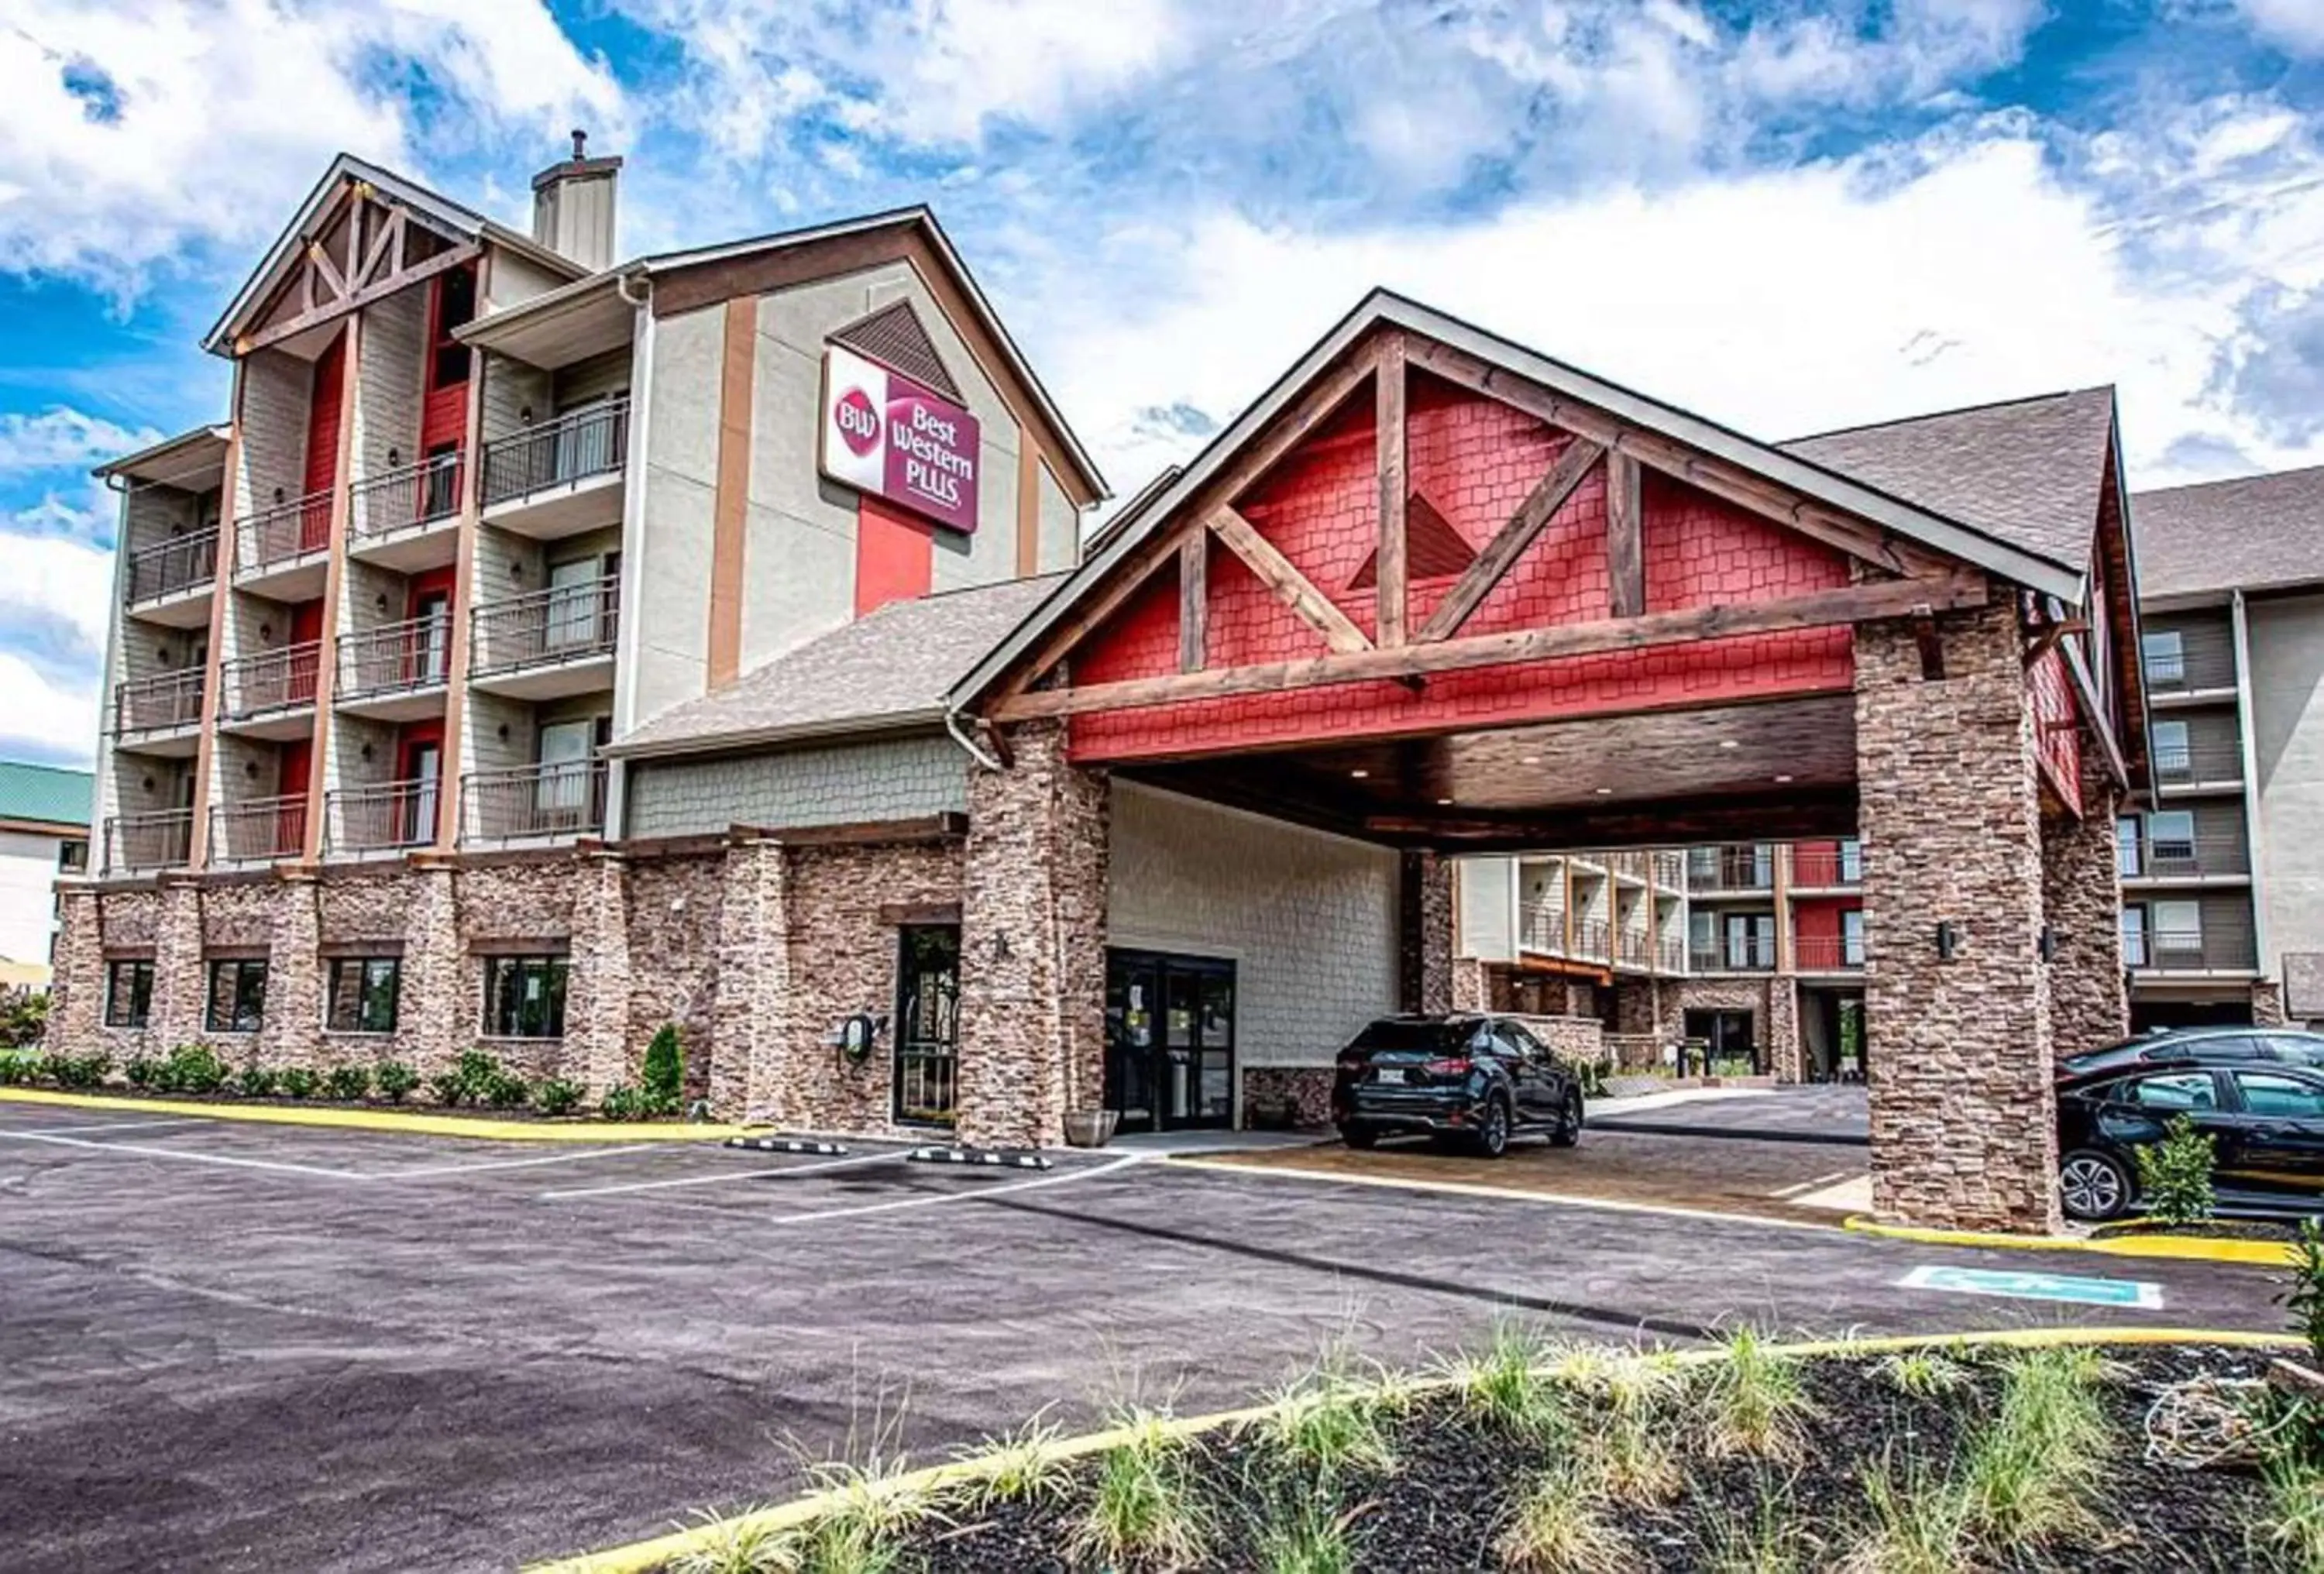 Property Building in Best Western Plus Apple Valley Lodge Pigeon Forge